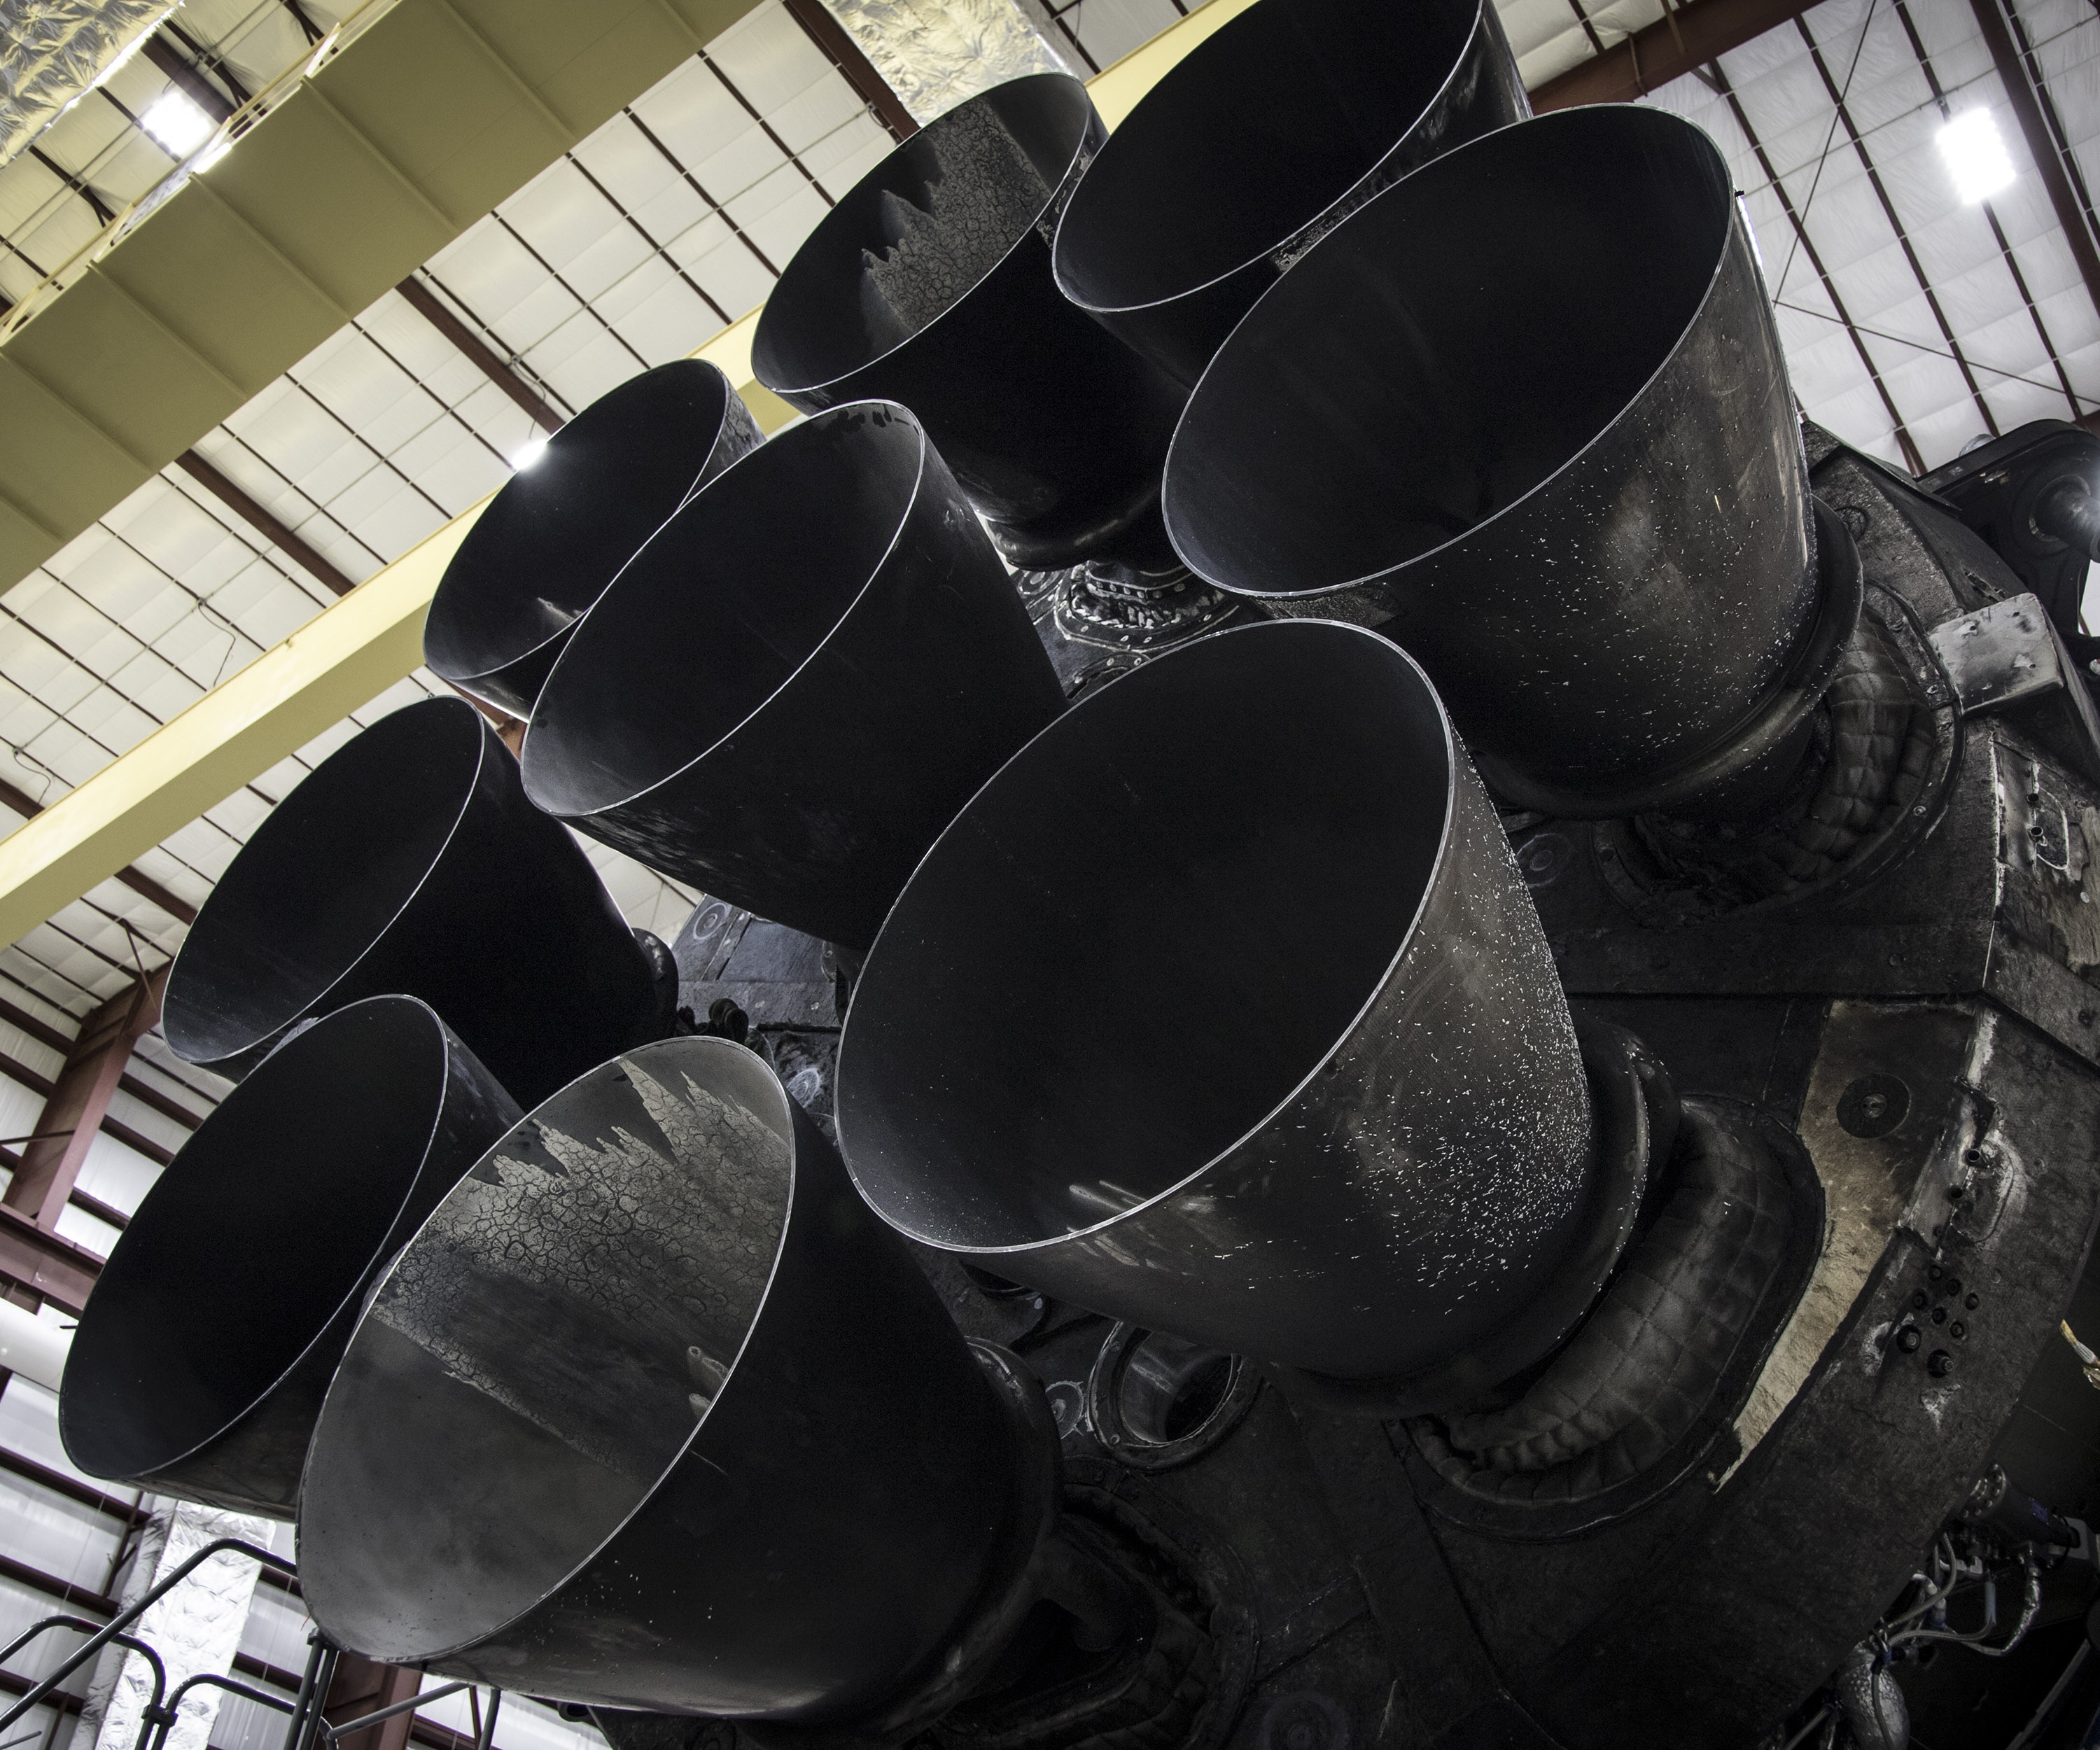 Falcon 9 first stage in hangar, upgraded Merlin engines close-up